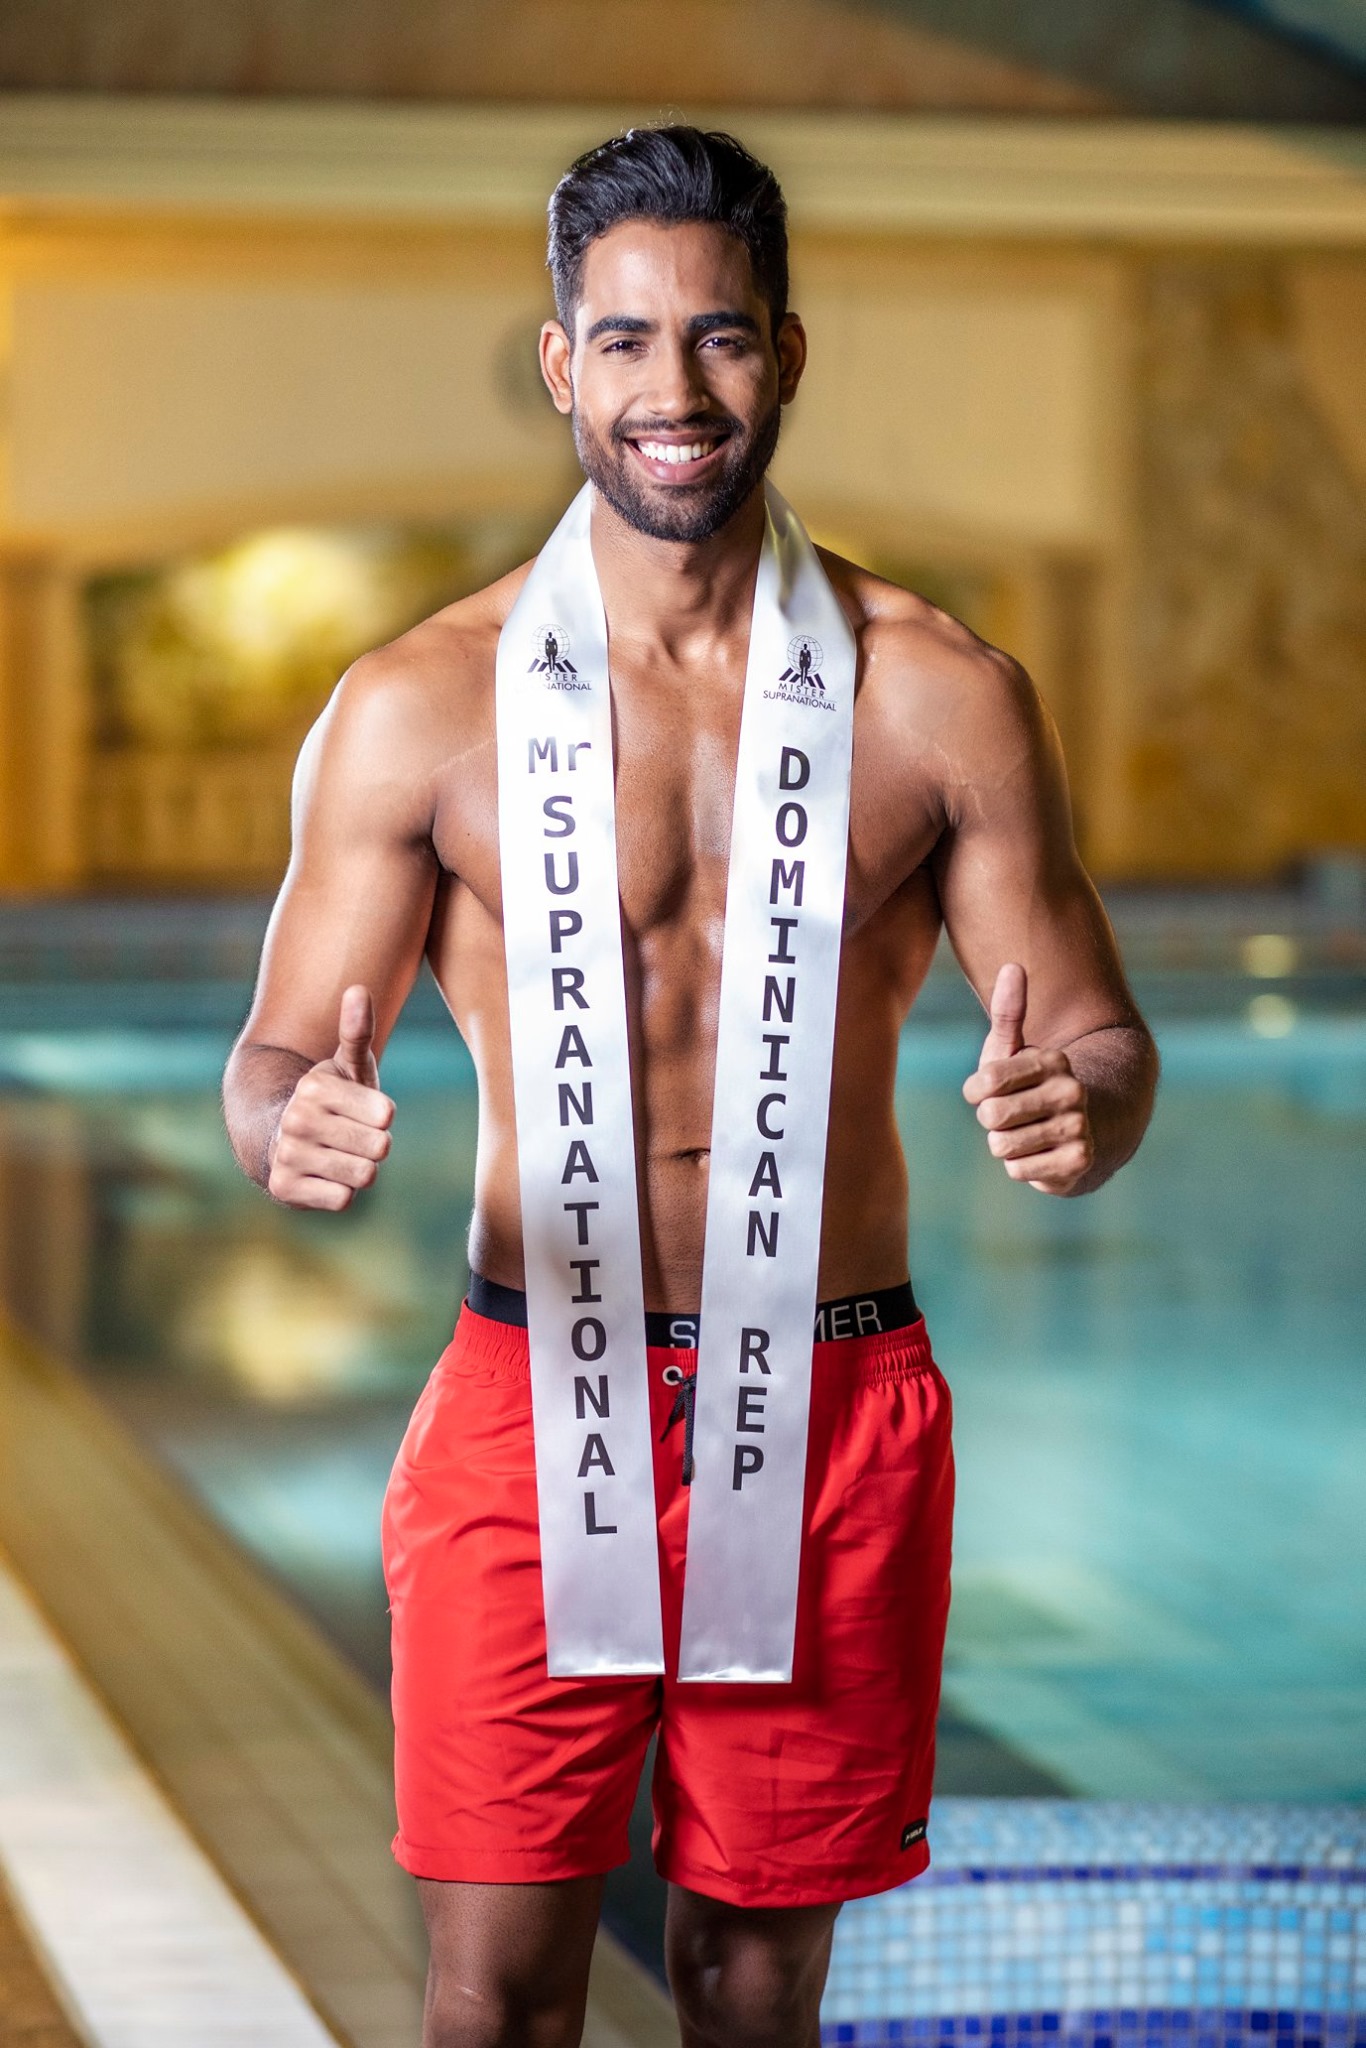 Mister Supranational 2019 Official Swimwear 0011